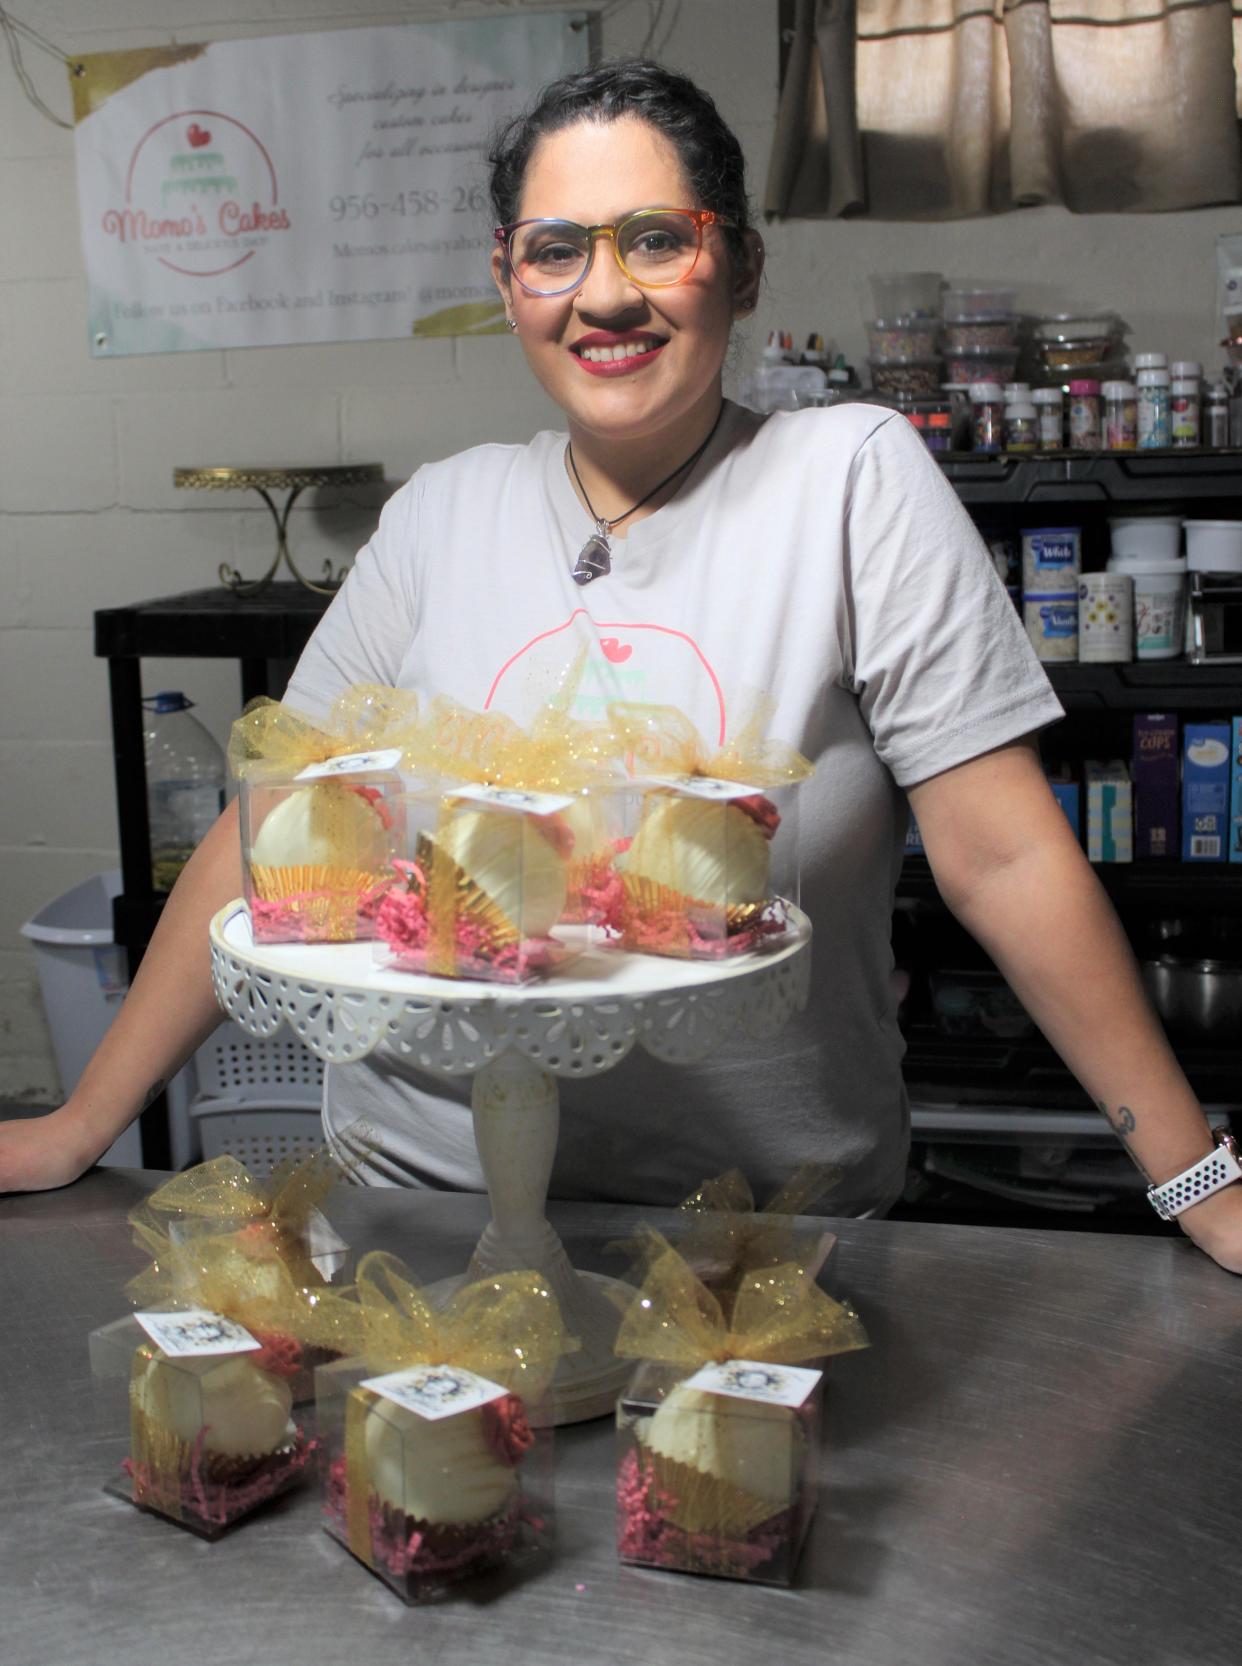 Monica Castillo-Gonzalez of Momo’s Cakes, a Monroe home-based business, participated in the Betty White Challenge, a viral fundraiser asking Betty White fans and animal lovers to support shelters and rescues.